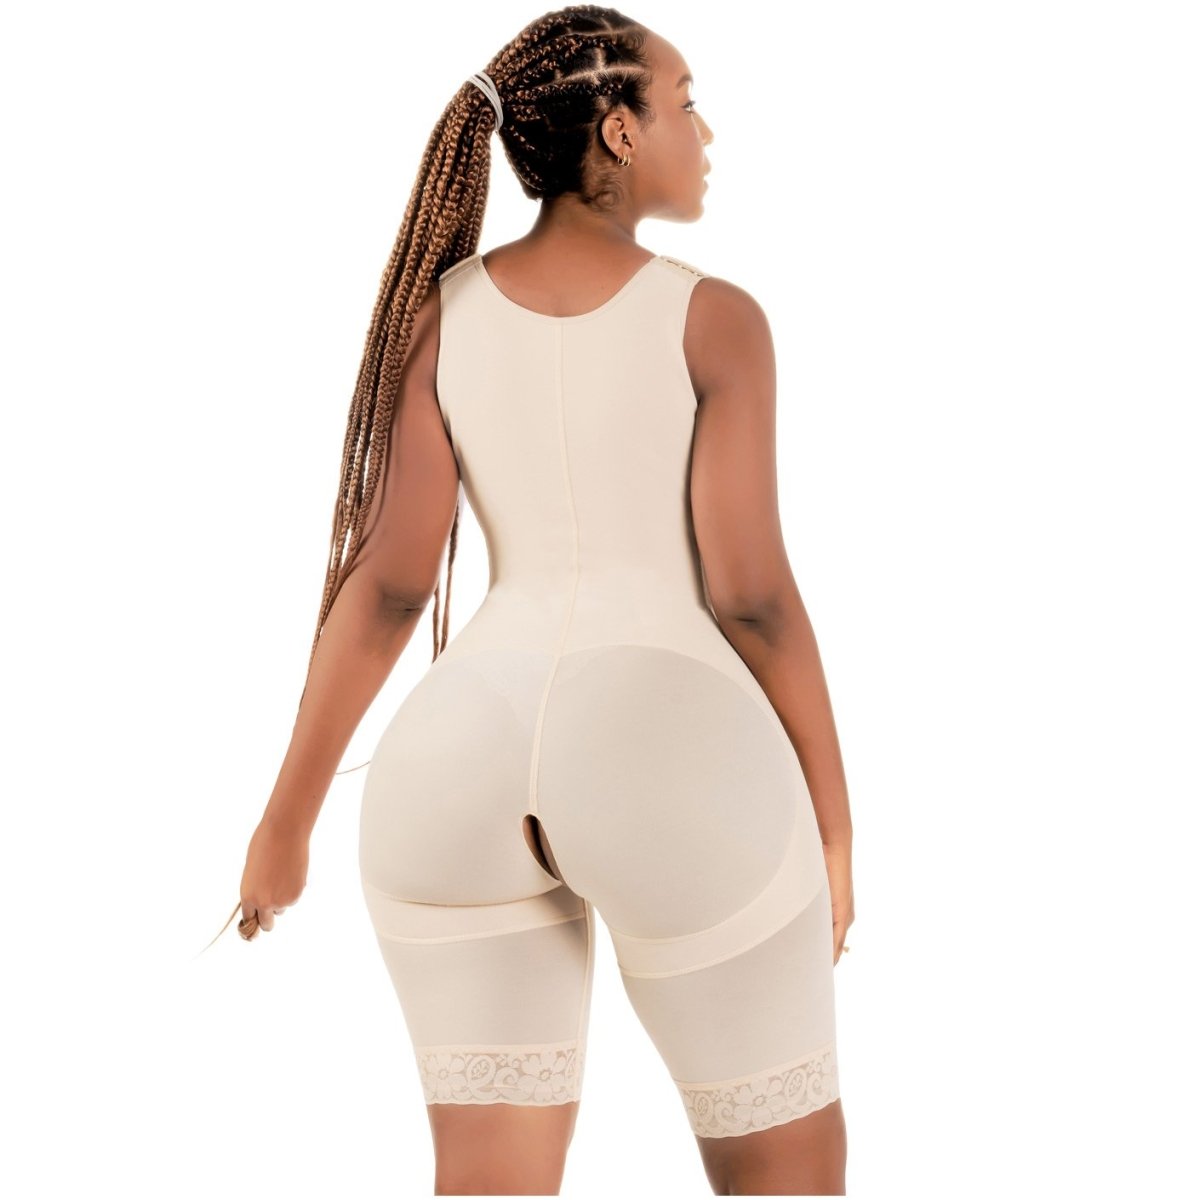 Bling Shapers Extreme 553BF - Colombian Body Shaper